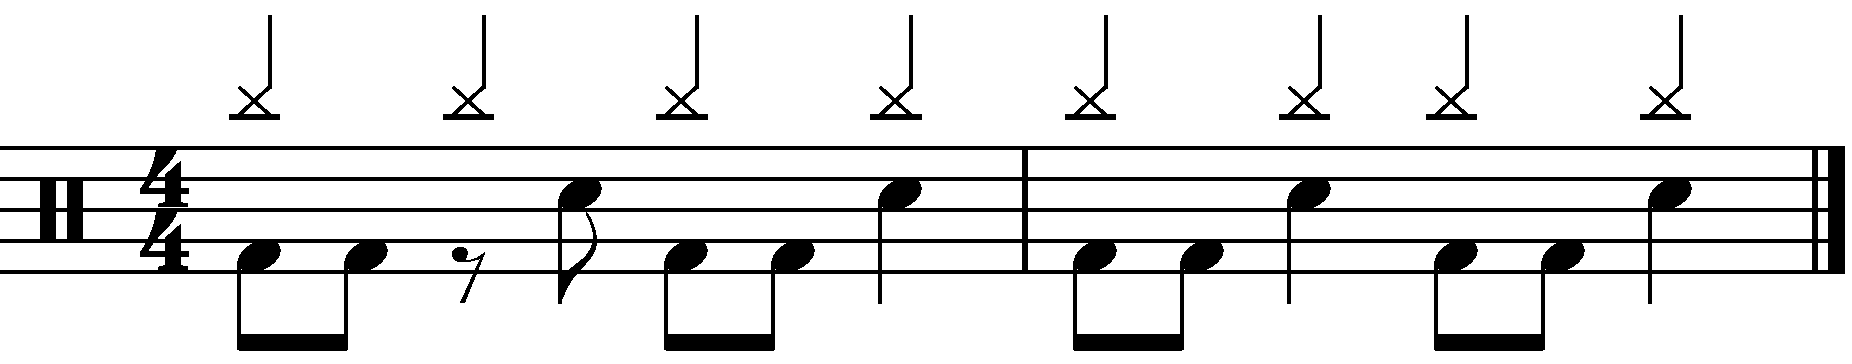 A two bar groove using displacement